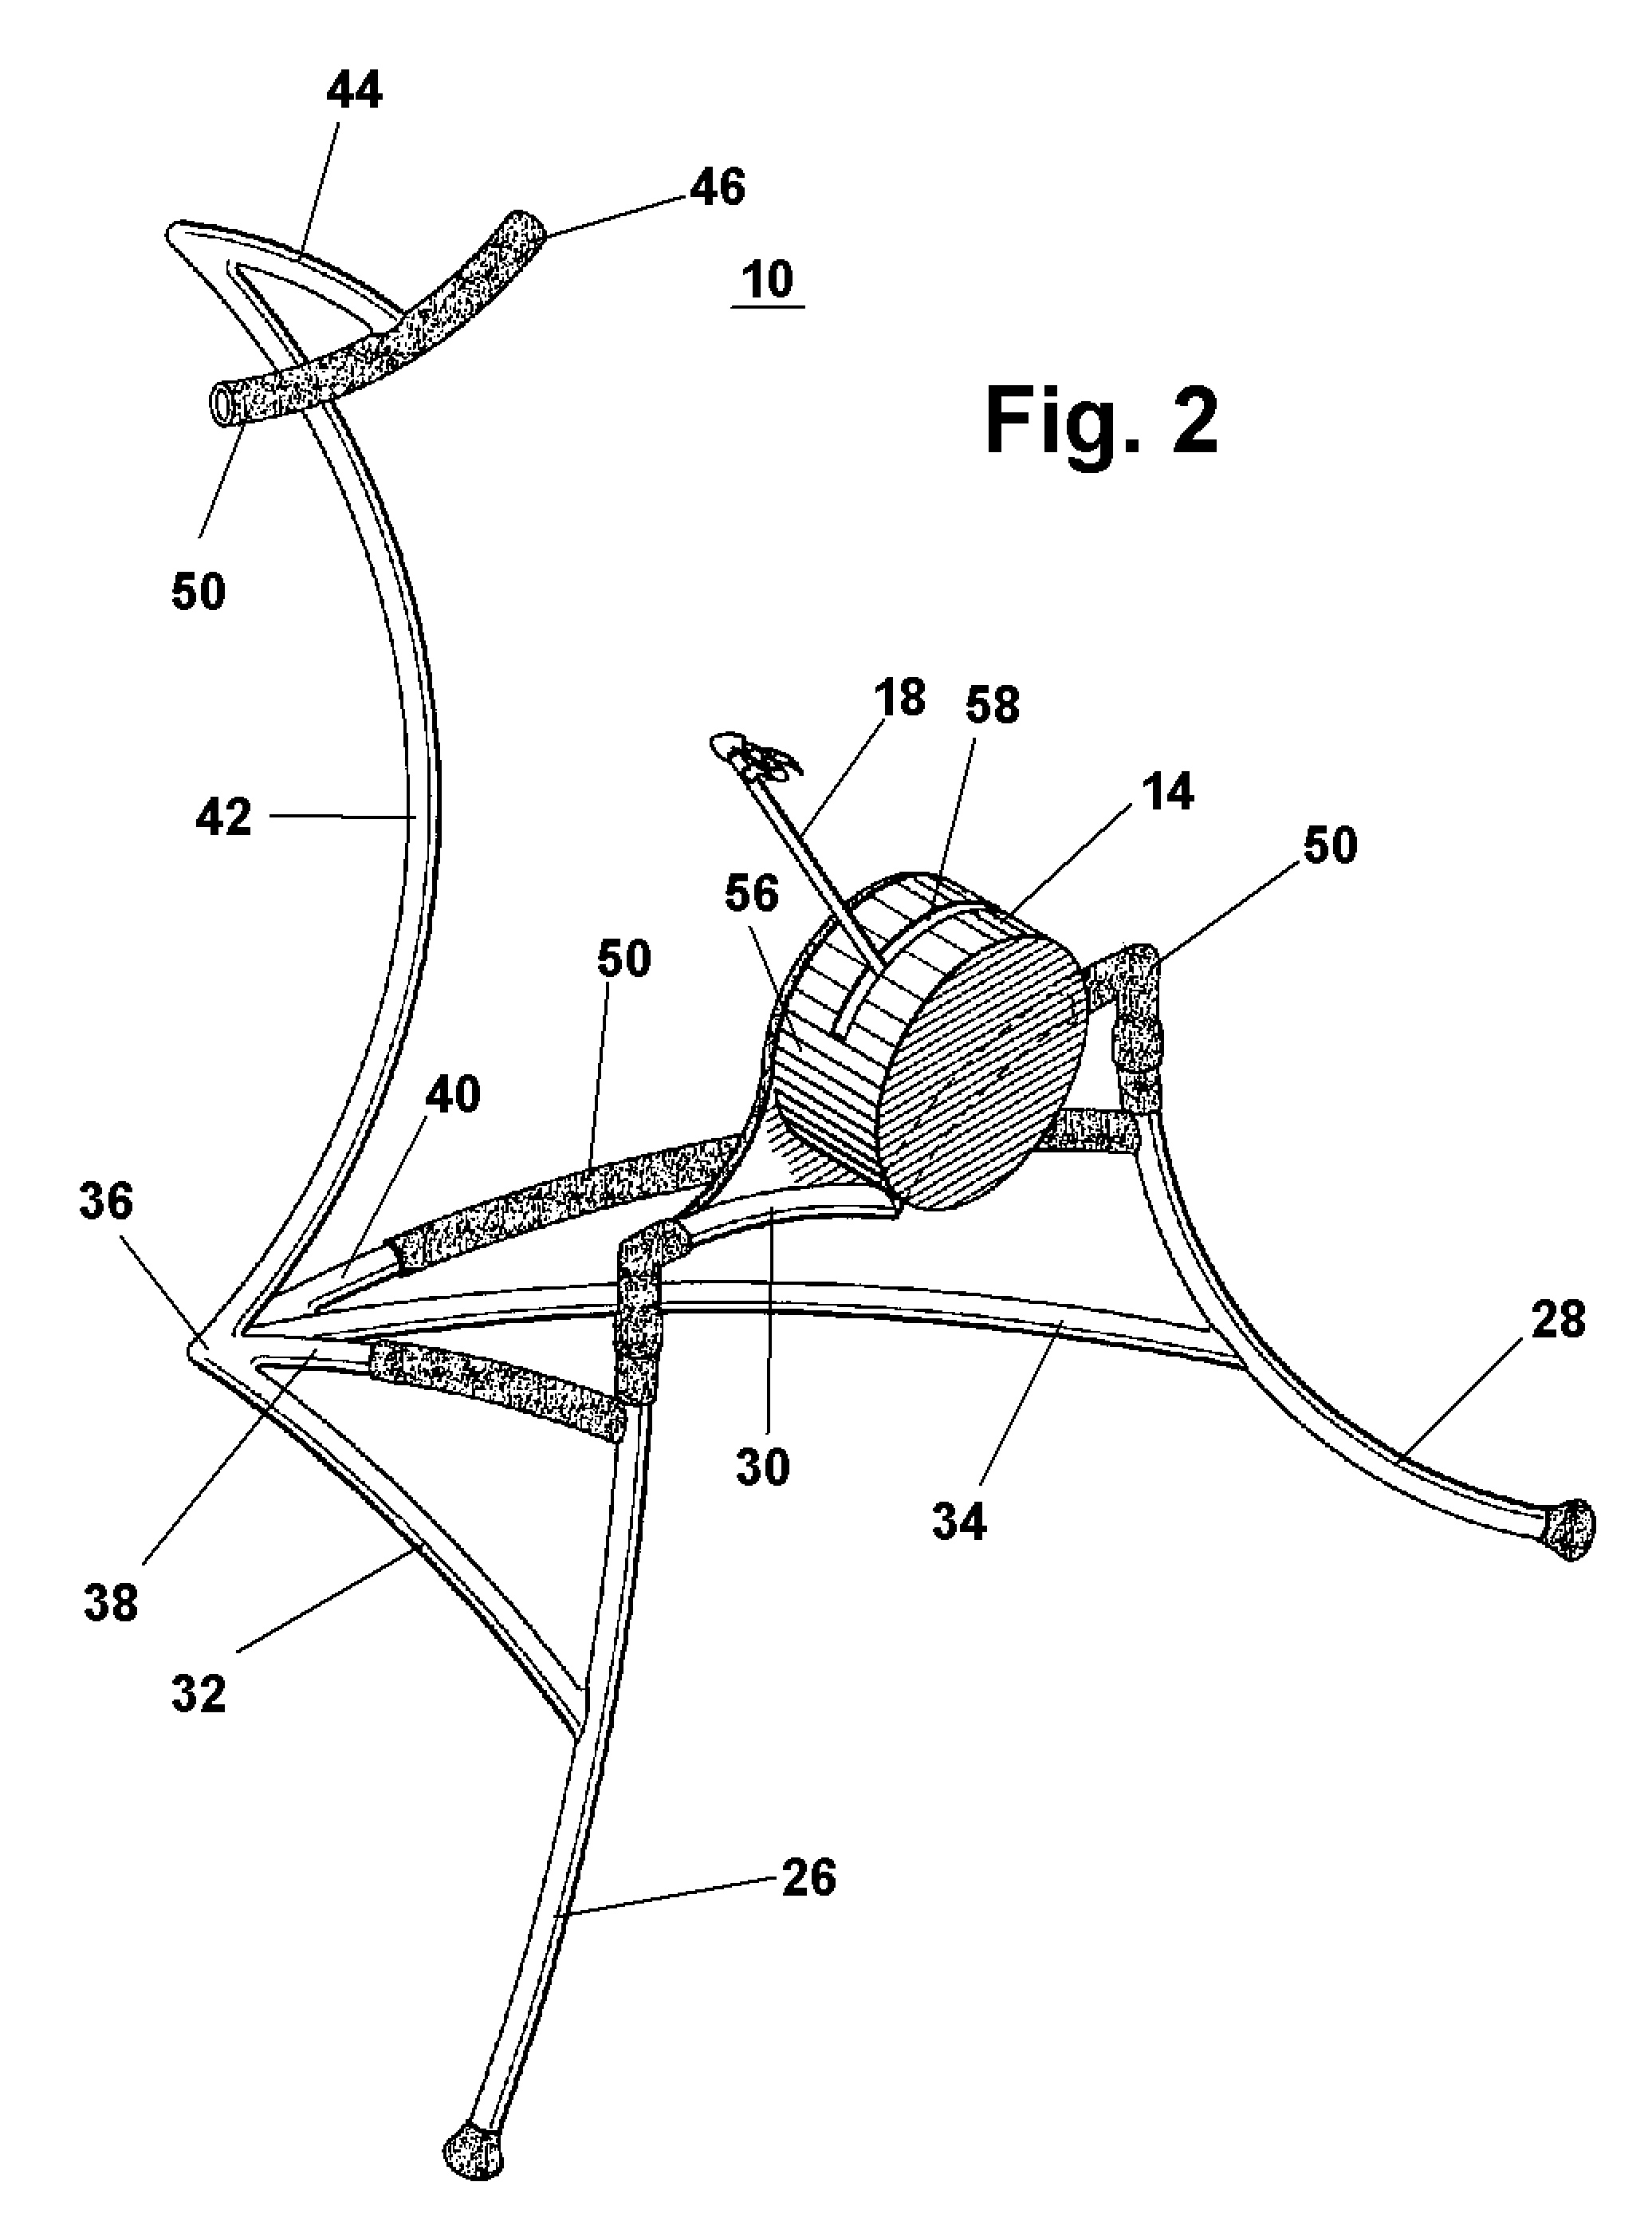 Stringed instrument conditioning device